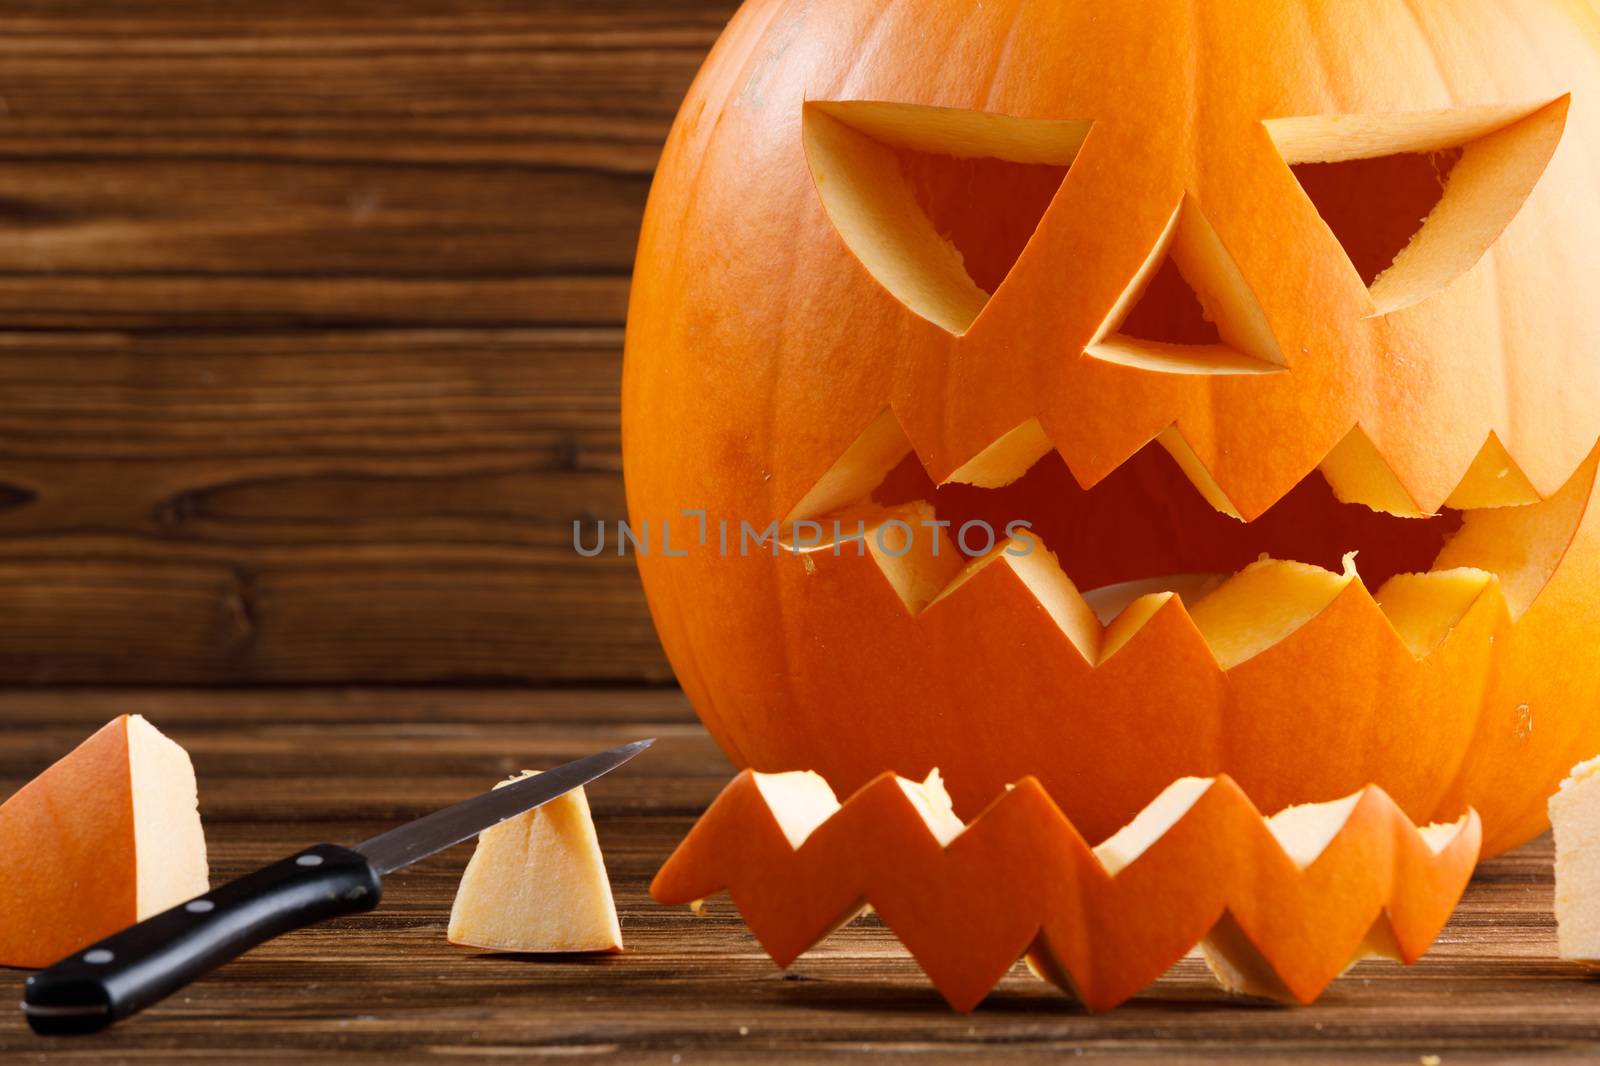 Carving of Halloween pumpkin in progress, pieces and cutting knife on wooden background